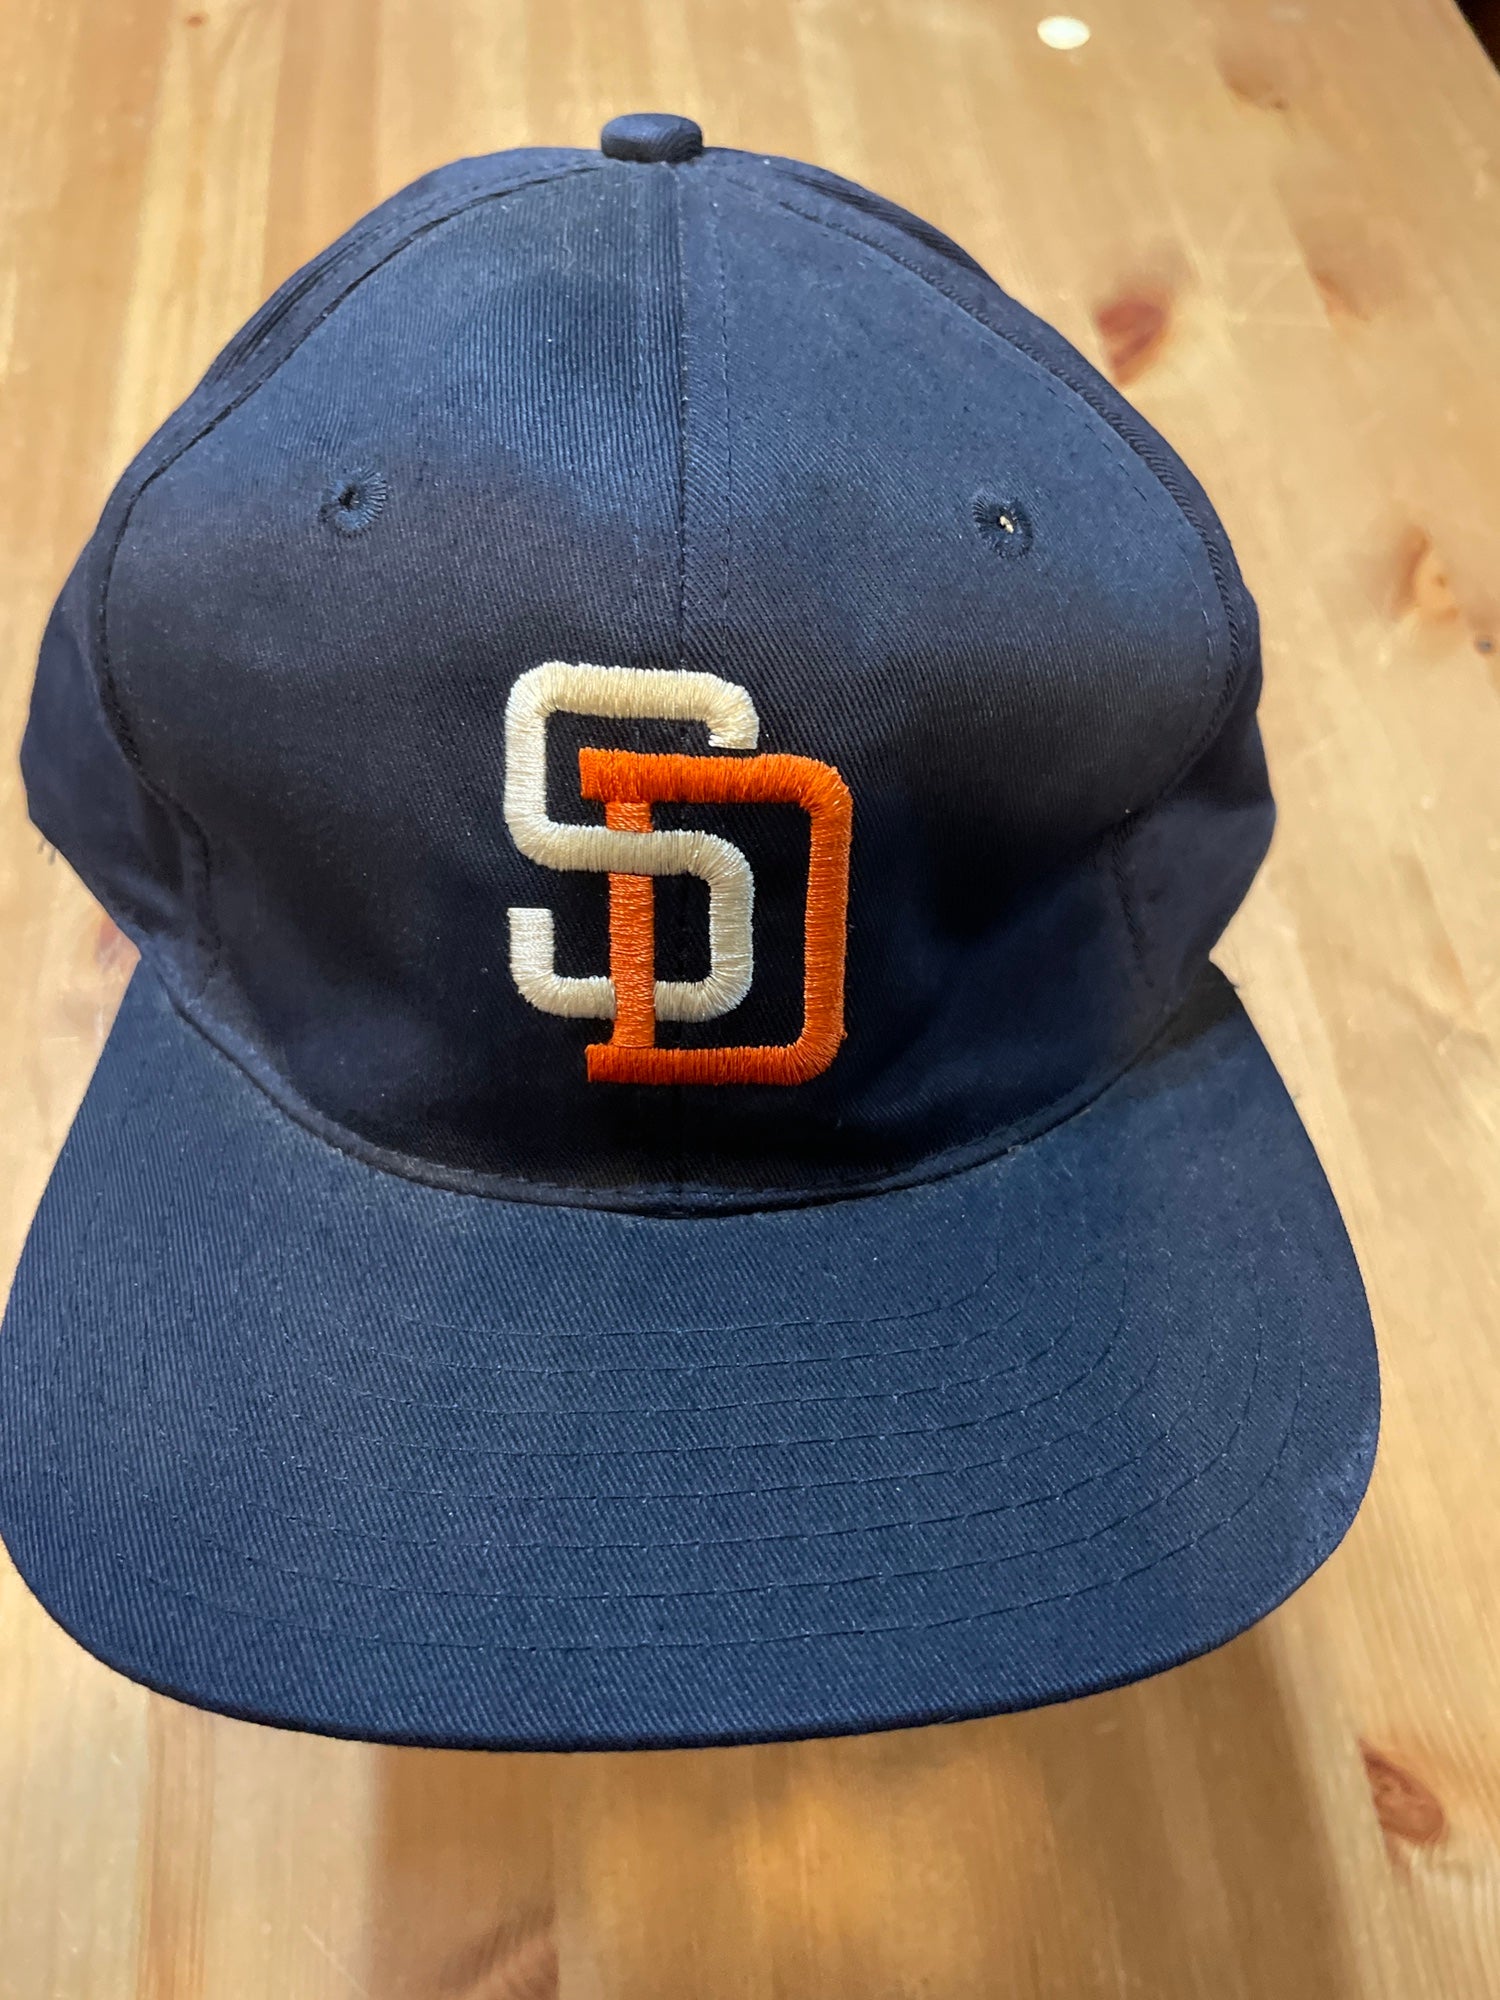 Vintage San Diego Padres Sports Specialties Pro Fitted Baseball